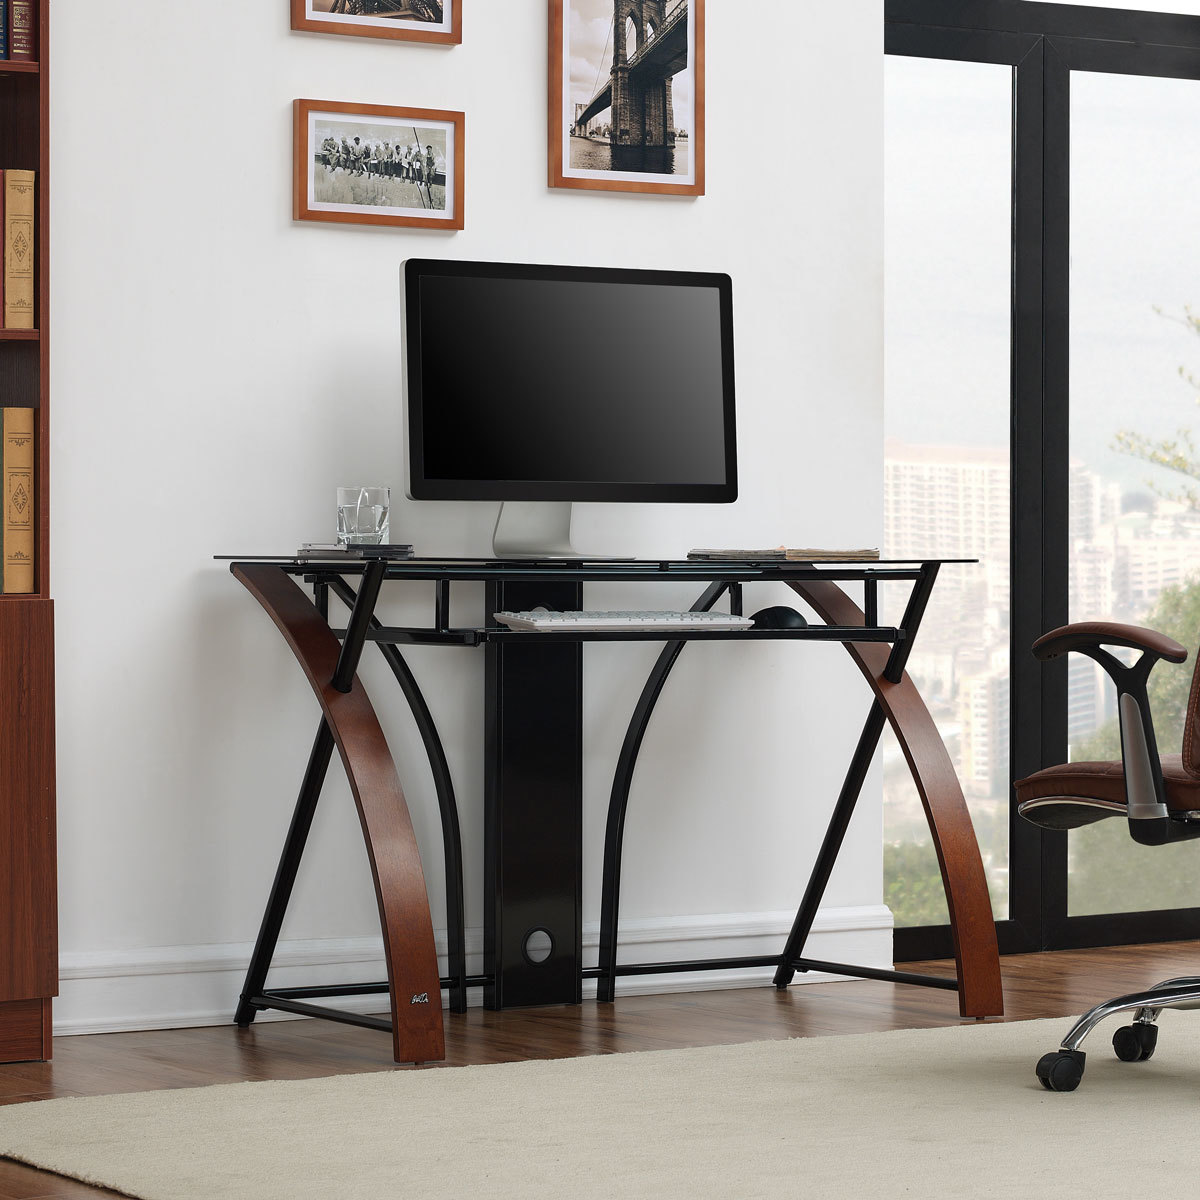 Accord Concept Ced 301 Espresso Curved Wood Glass Home Office